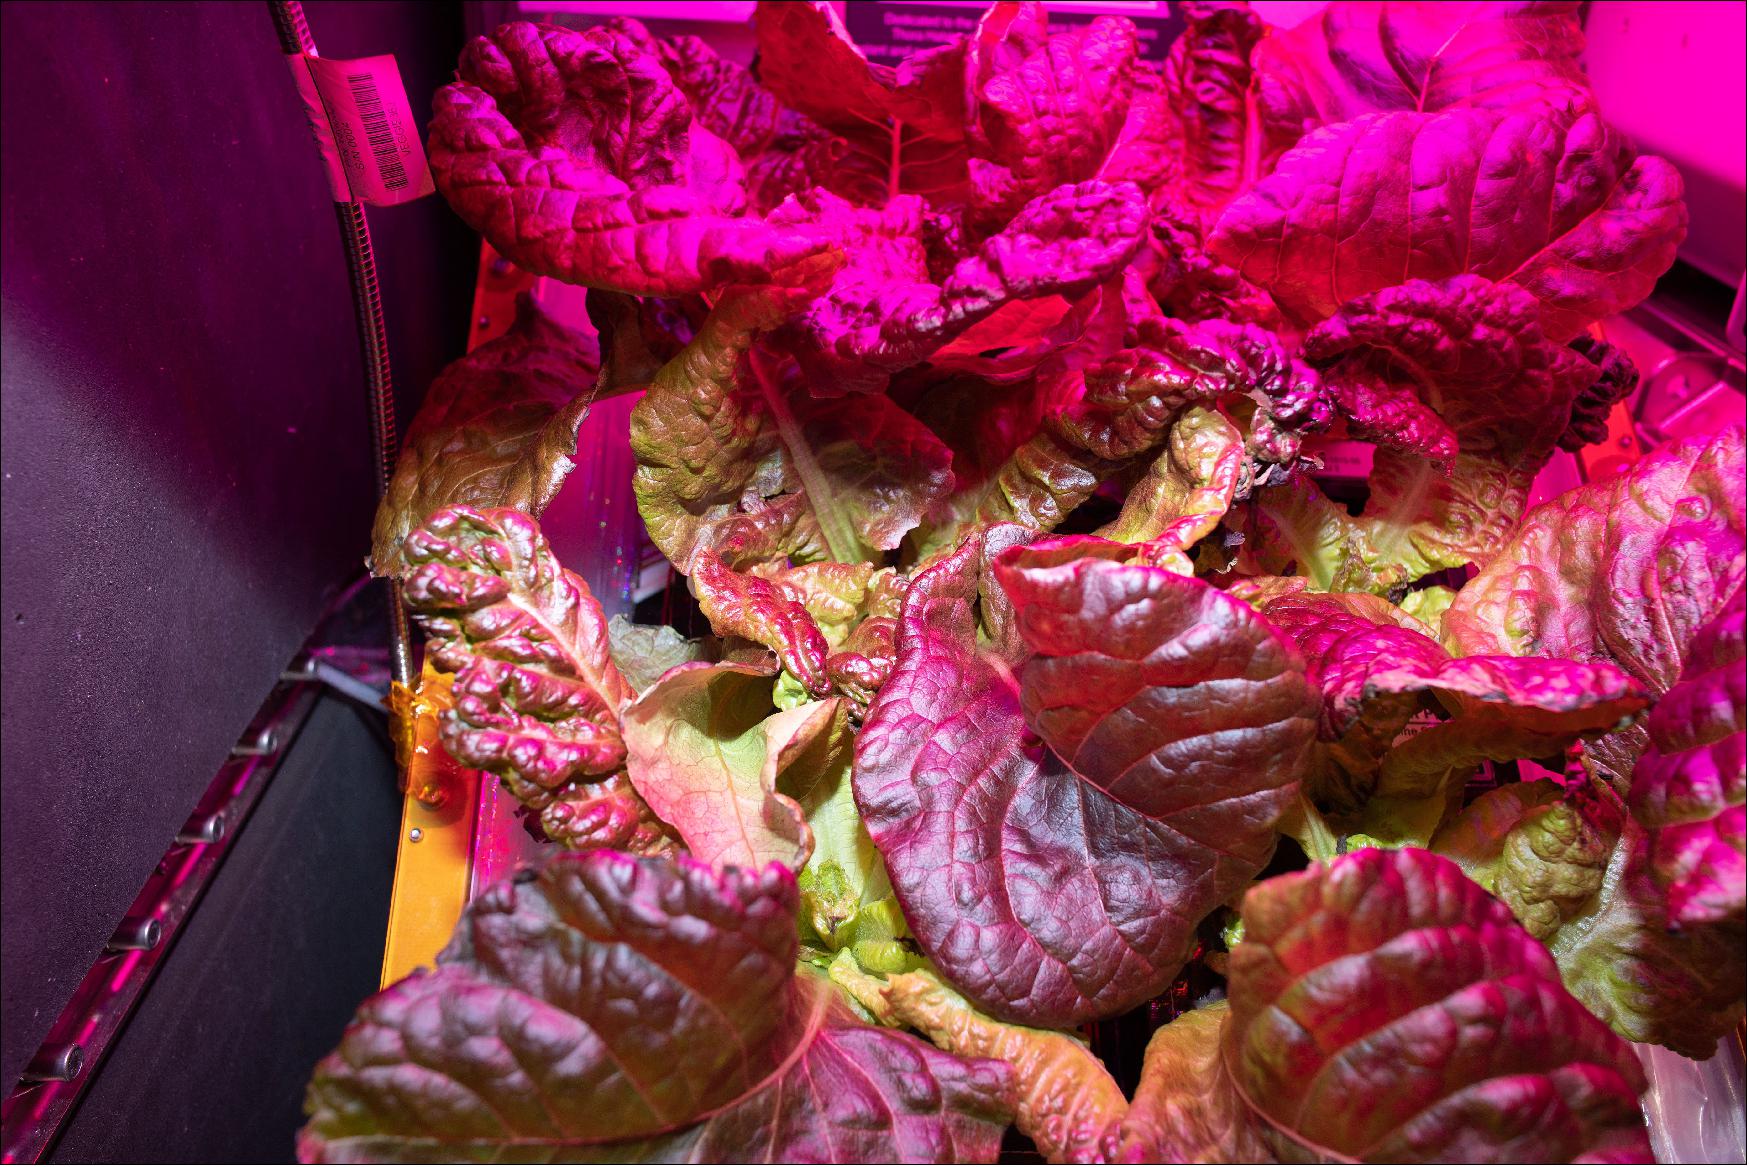 Figure 127: ‘Outredgeous' red romaine lettuce grown for experiment VEG-03J in the Vegetable Production System (Veggie) aboard the International Space Station exhibited some of the best overall uniformity and crop size for red romaine lettuce grown in space. This experiment demonstrated a new way of storing, handling, and planting seeds in space, using seed film, a water-soluble polymer, similar to a breath freshener strip, that contained the seeds (image credit: NASA)